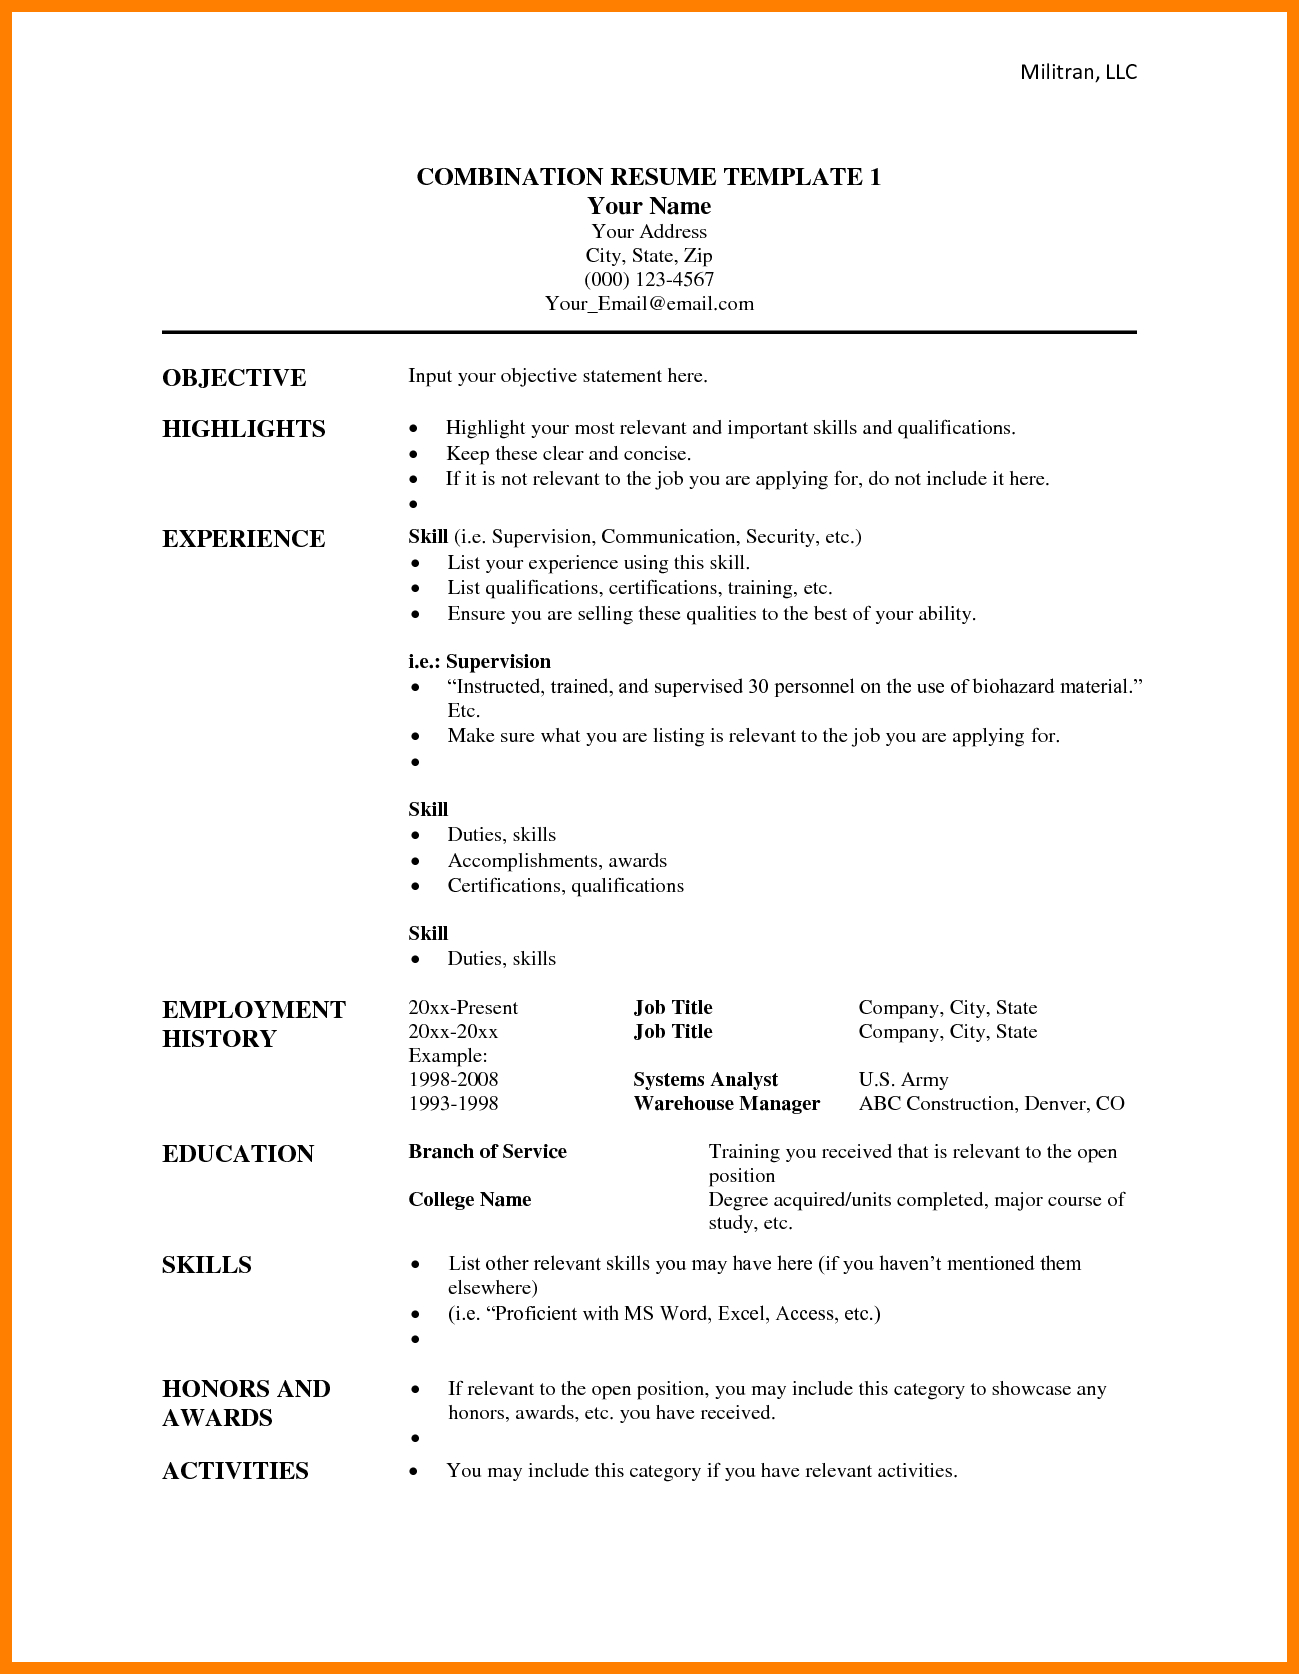 001 Functional Resume Template Microsoft Word Best Intended For Combination Resume Template Word